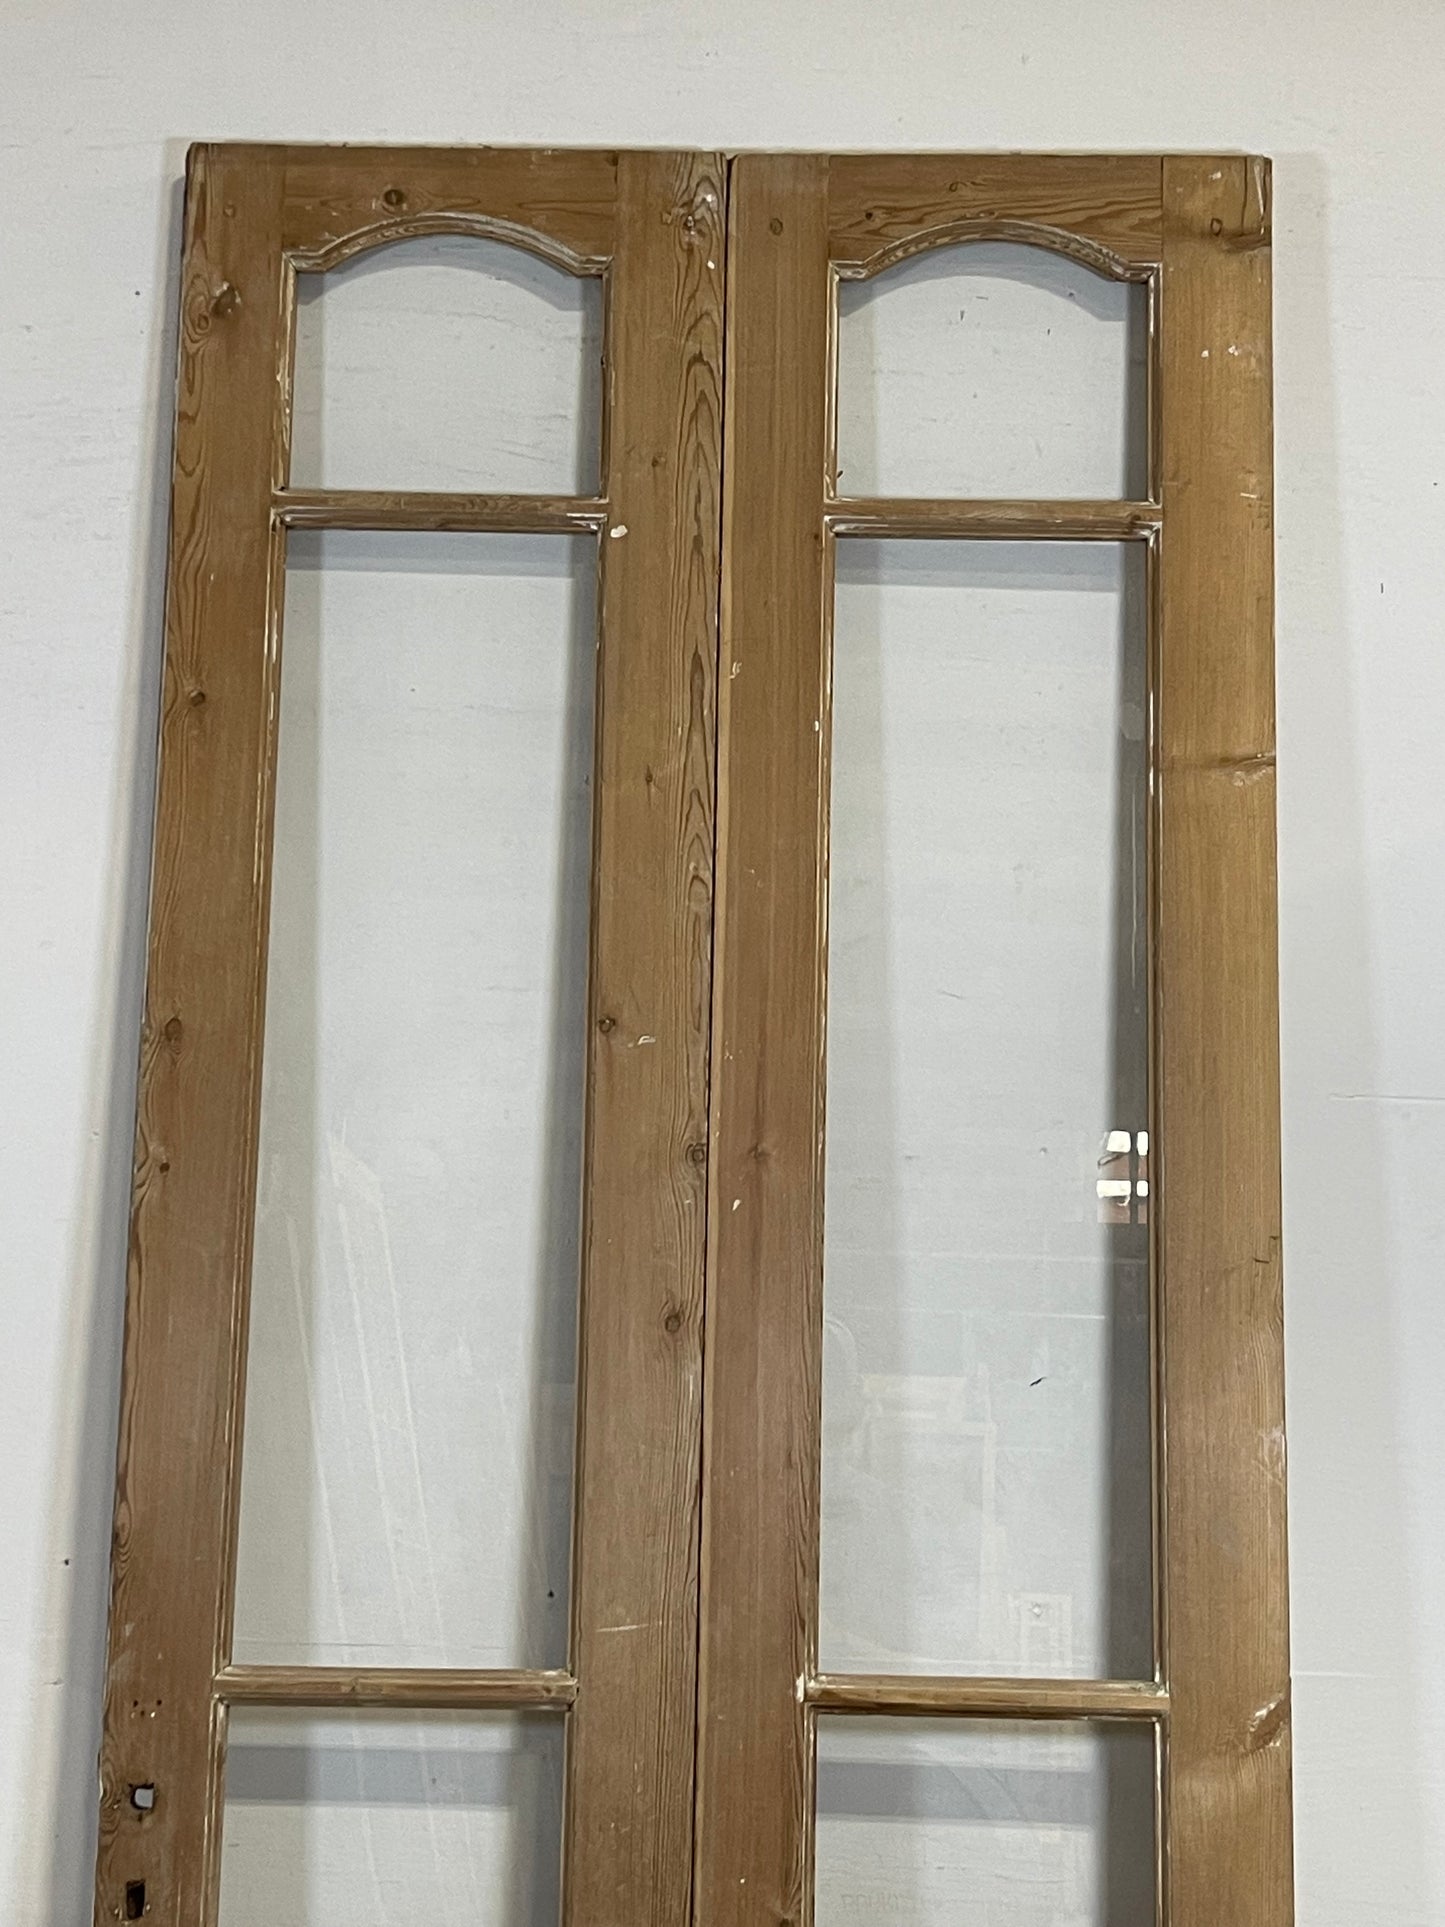 Antique French panel doors with glass (99x37.5) k315